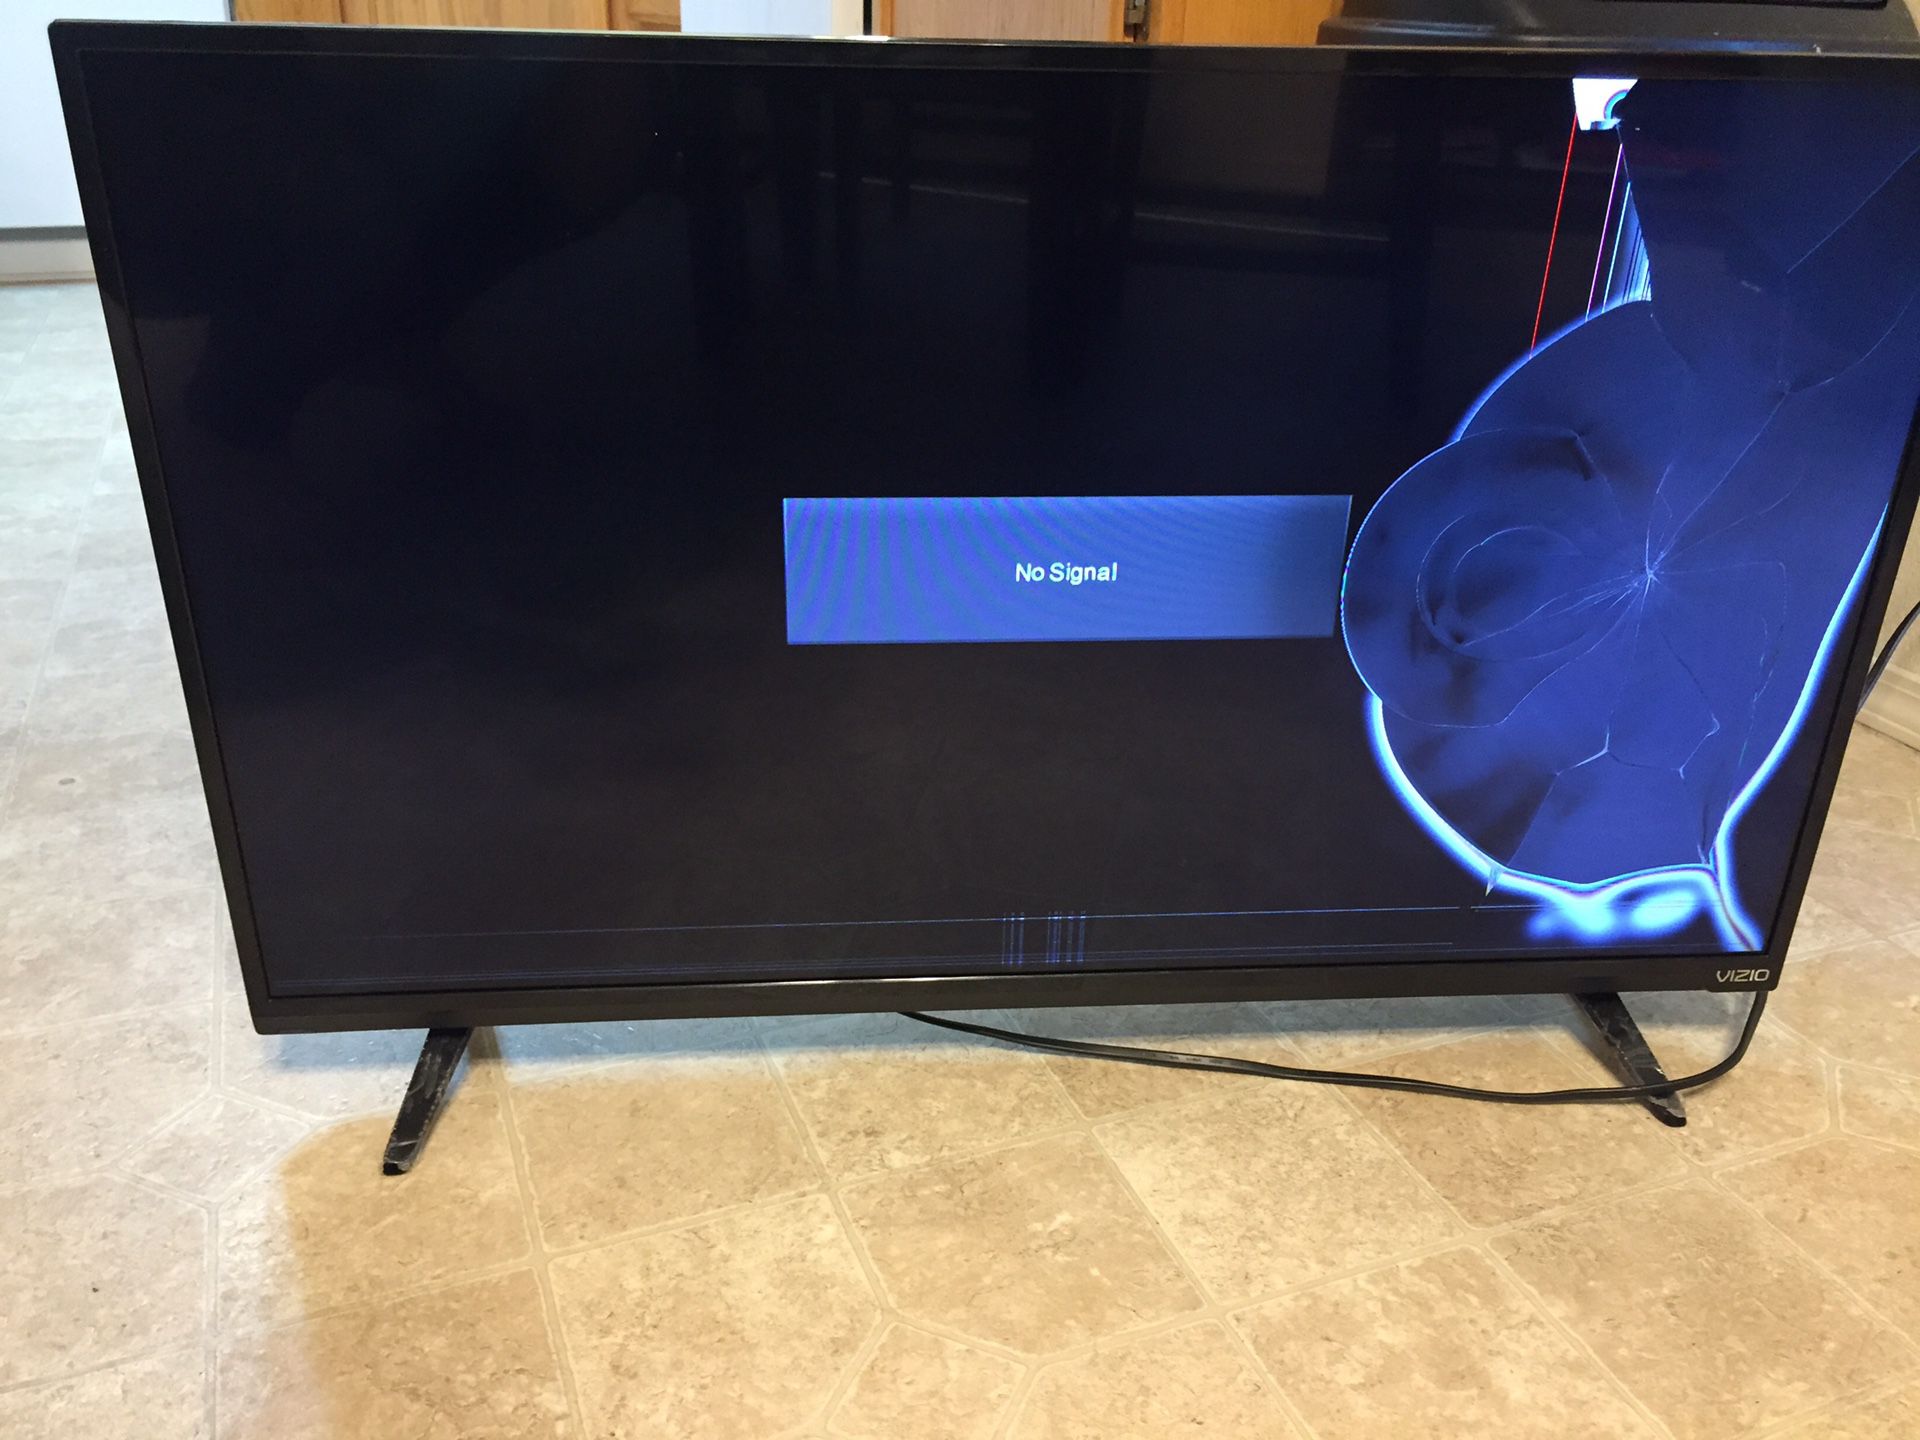 Tv with damaged screen